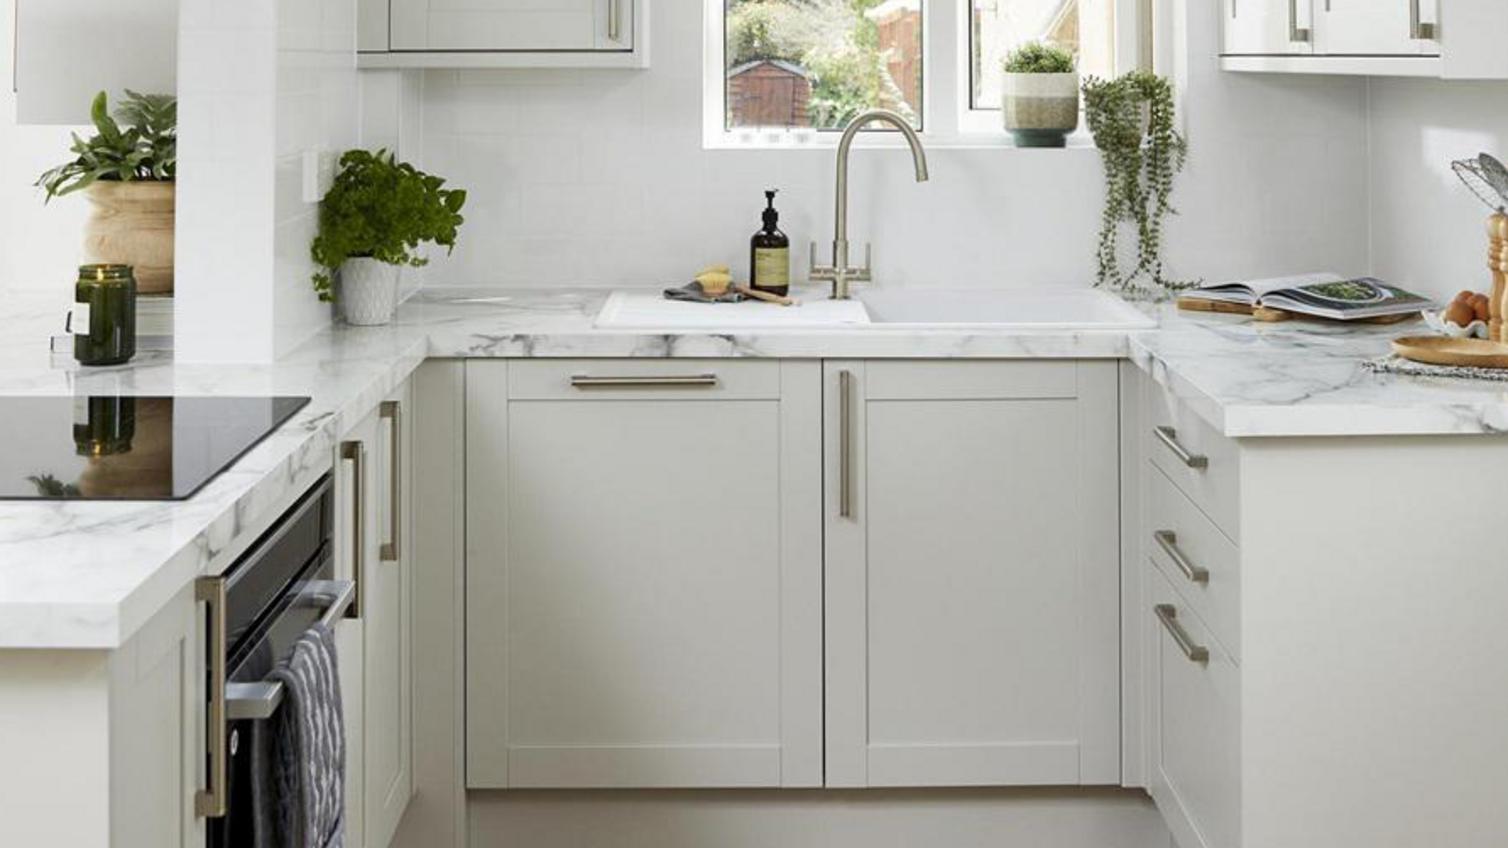 Witney small shaker kitchen, finished in a dove grey colour. Features marble-effect worktops and metallic handles.